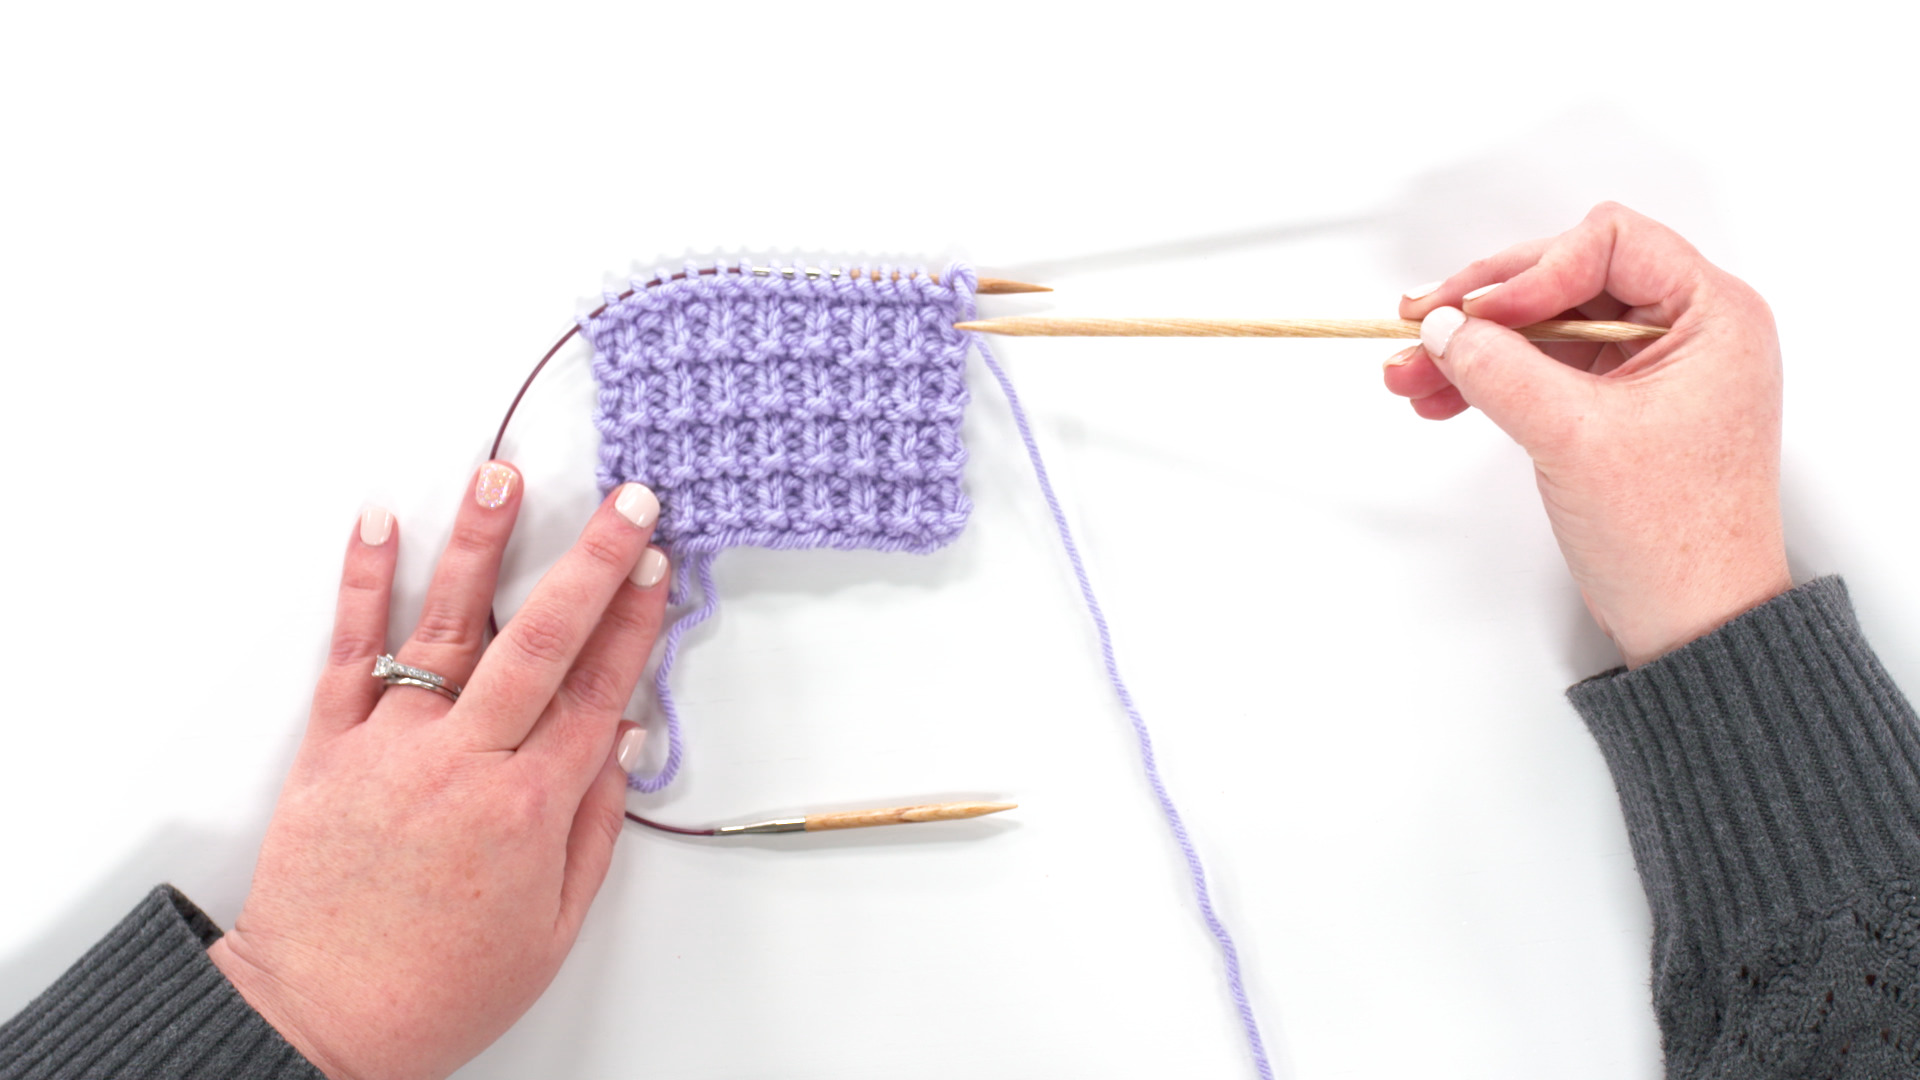 How to Loom Knit Easy Stitch Patterns for Beginners with Tutorial Videos